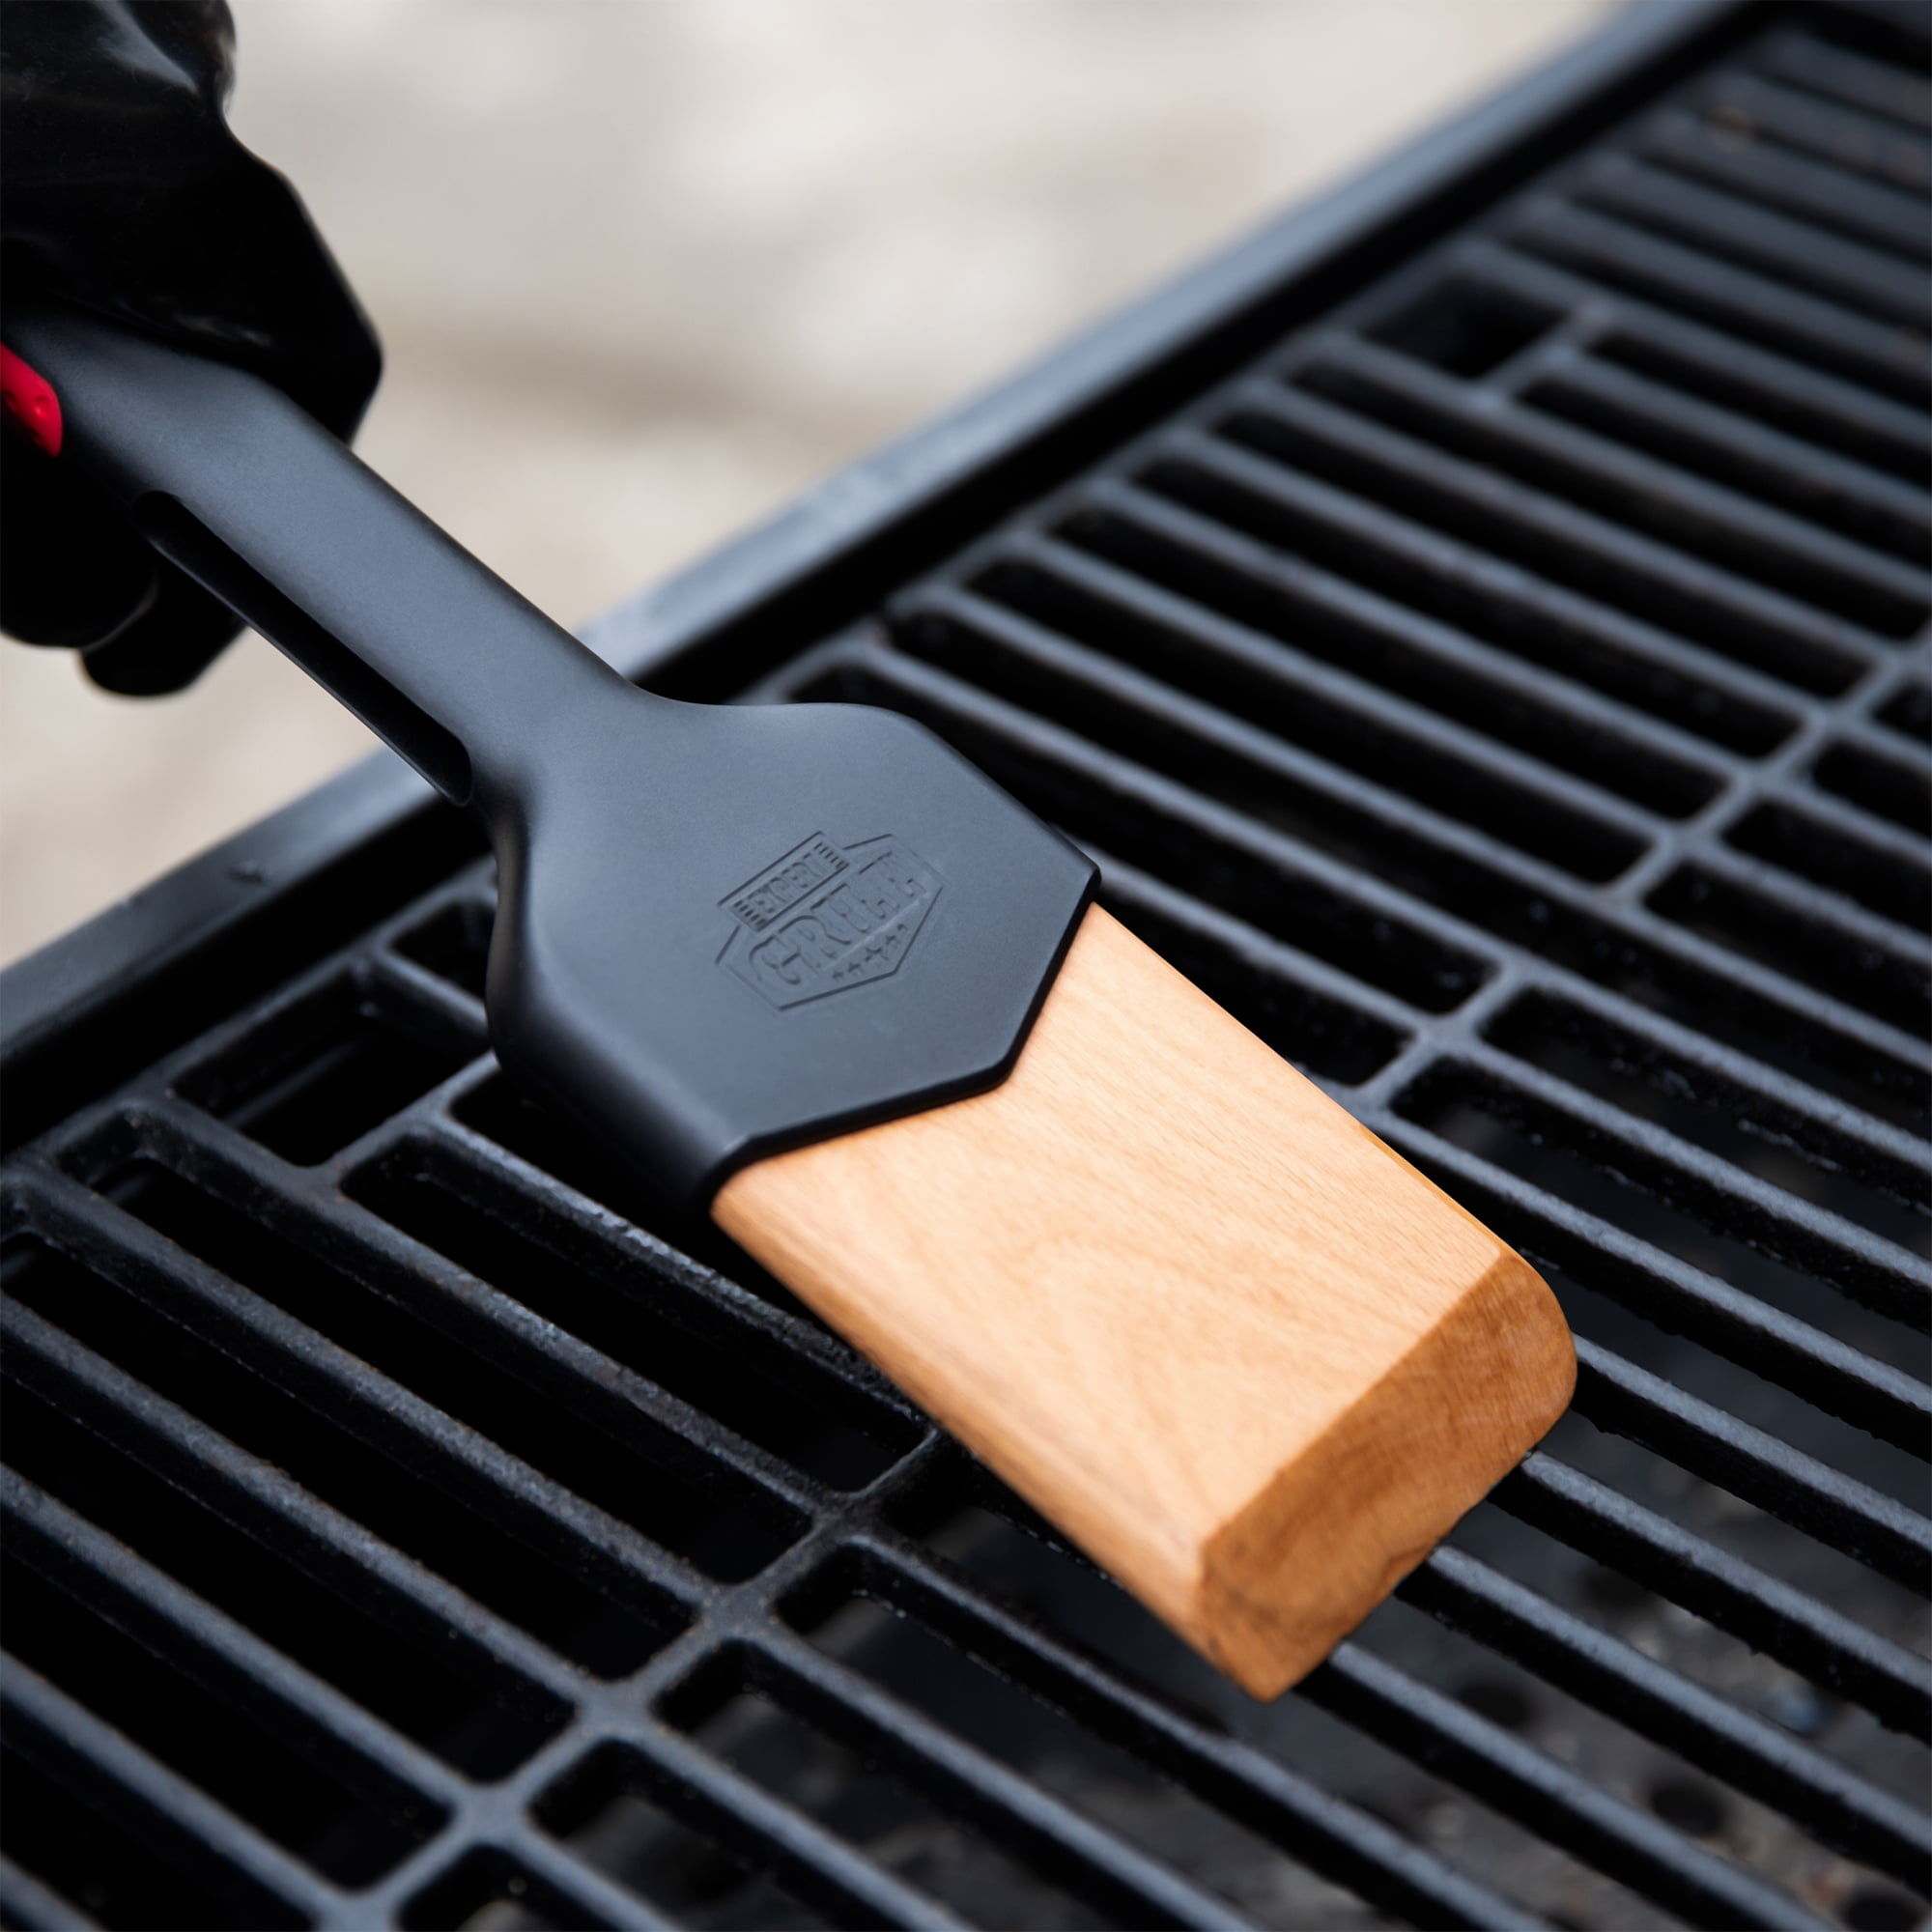 BBQ Butler Wood Grill Scraper - Wooden Barbecue Cleaner - BBQ Tools -  Bristle Free - Food Safe Oak Grill Scraper with Metal Scraping Hook and  Bottle